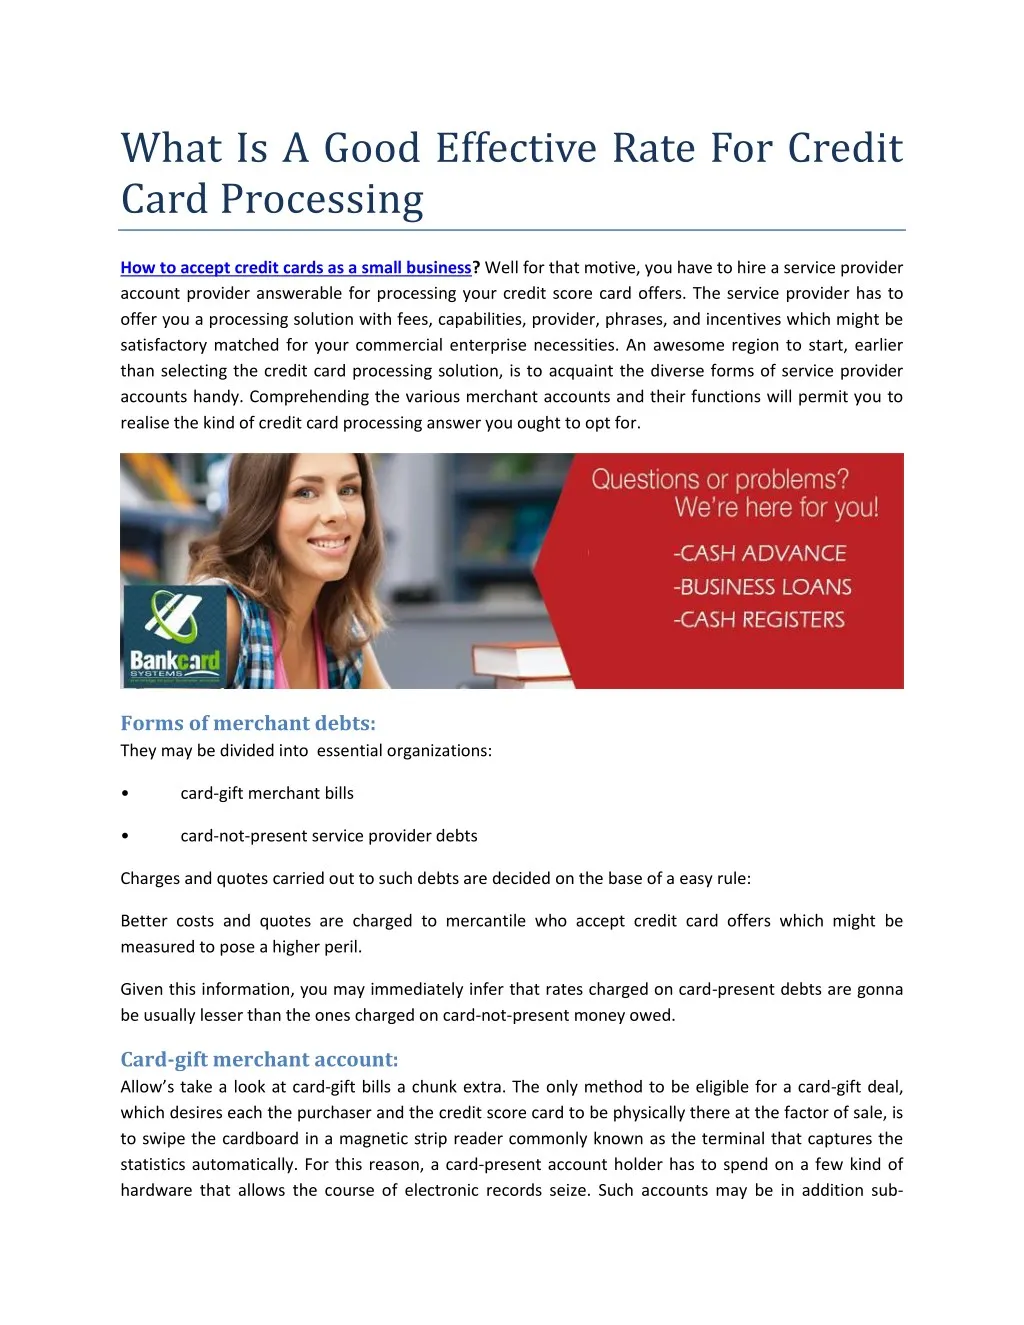 what is a good effective rate for credit card